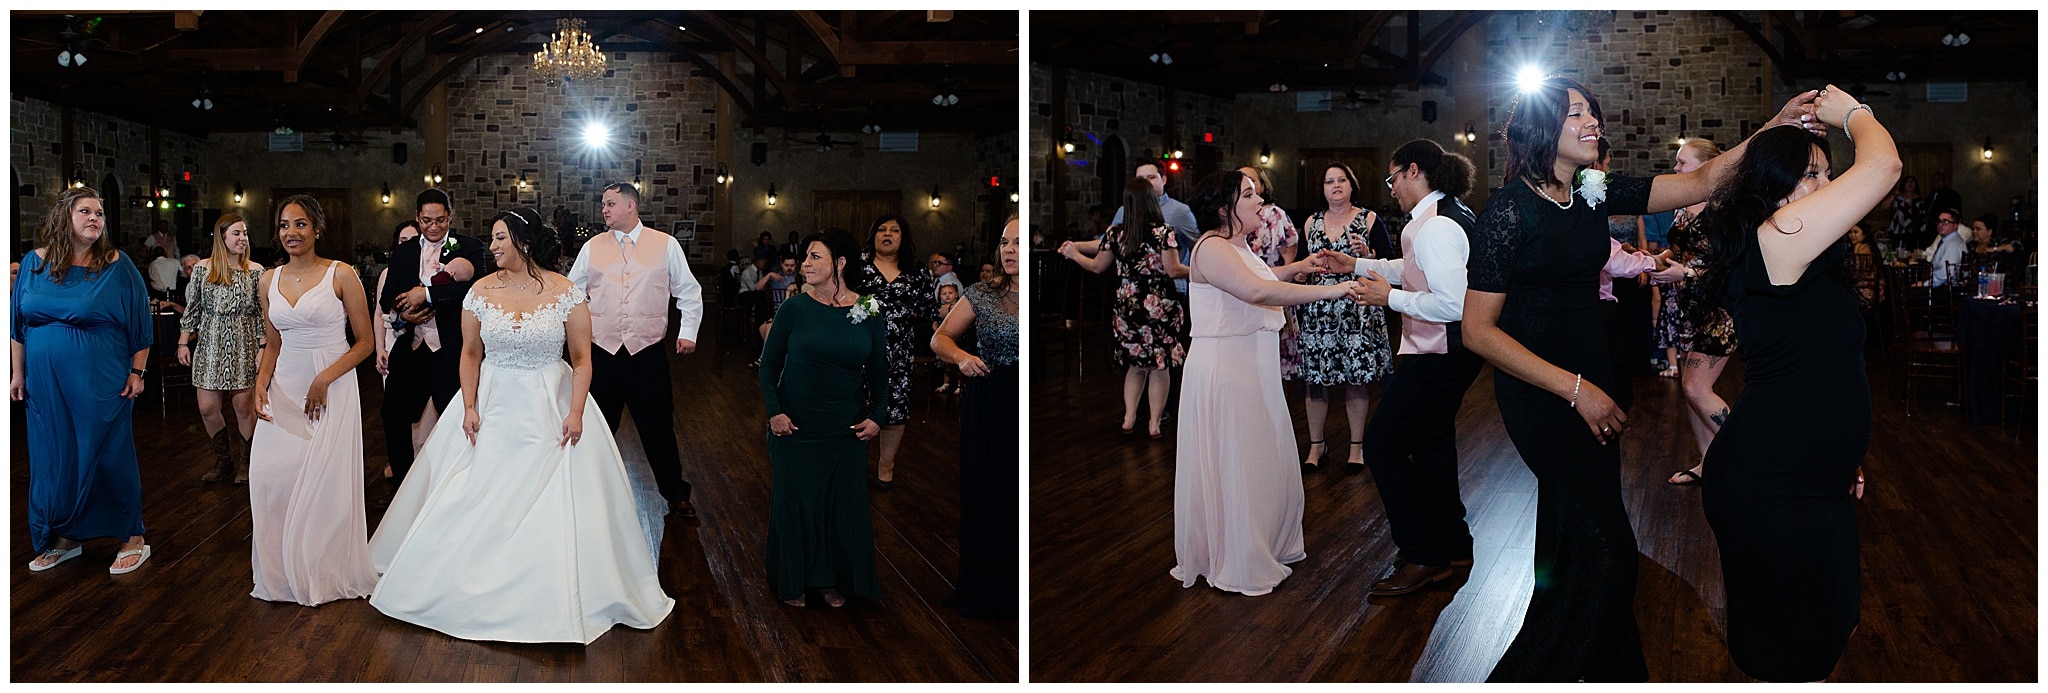 wedding dancing at Bridal Oaks in Cypress Texas by Houston wedding photographer Swish and Click Photography